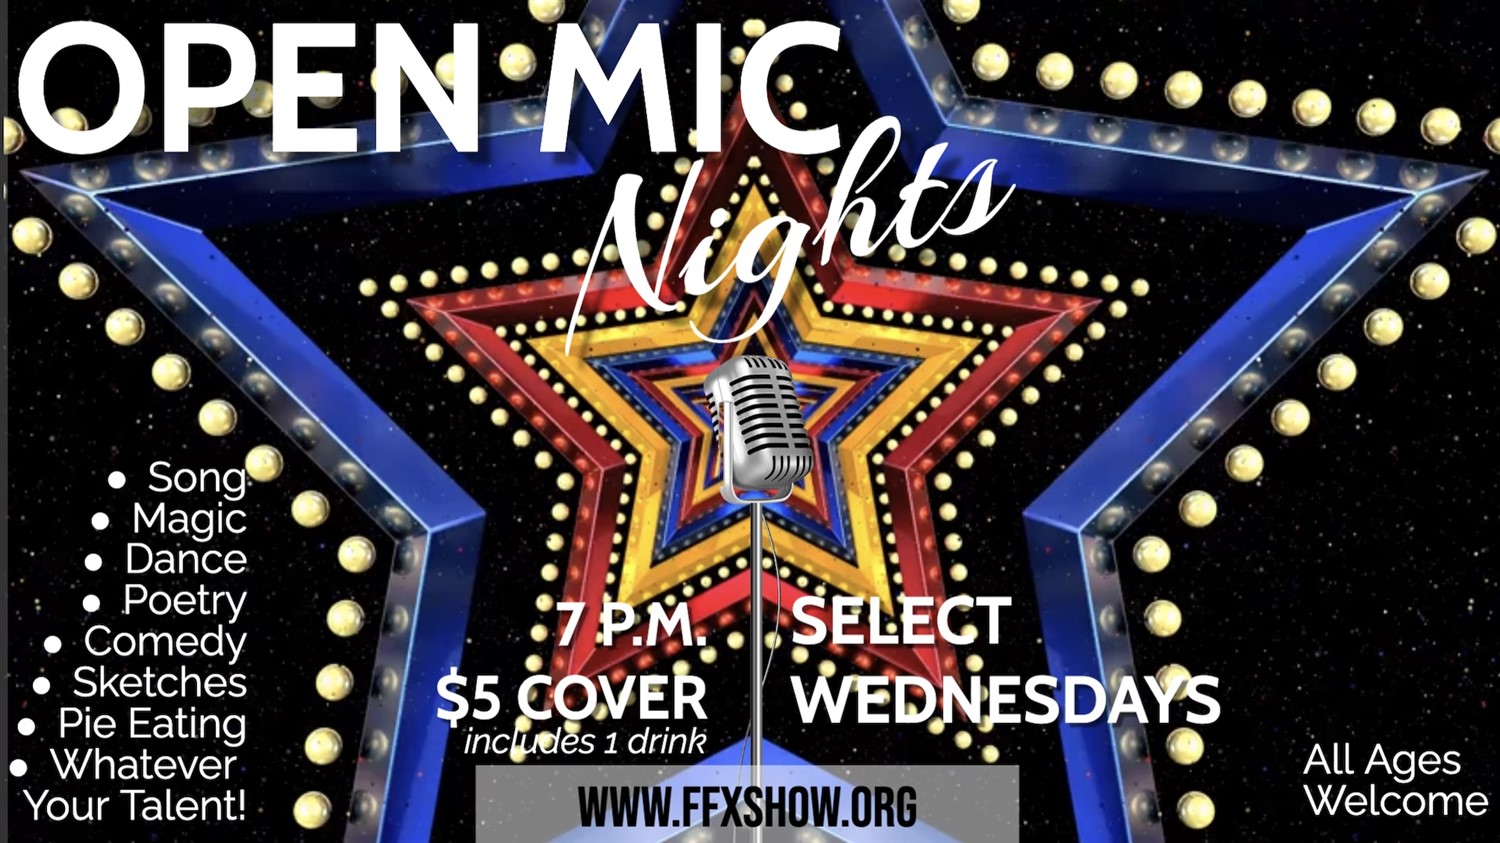 OPEN MIC NIGHT Come out to enjoy or share your talents on the FFX Stage! on feb. 01, 19:00@FFX Theatre - Compra entradas y obtén información enFamily Fun Xperience tickets.ffxshow.org